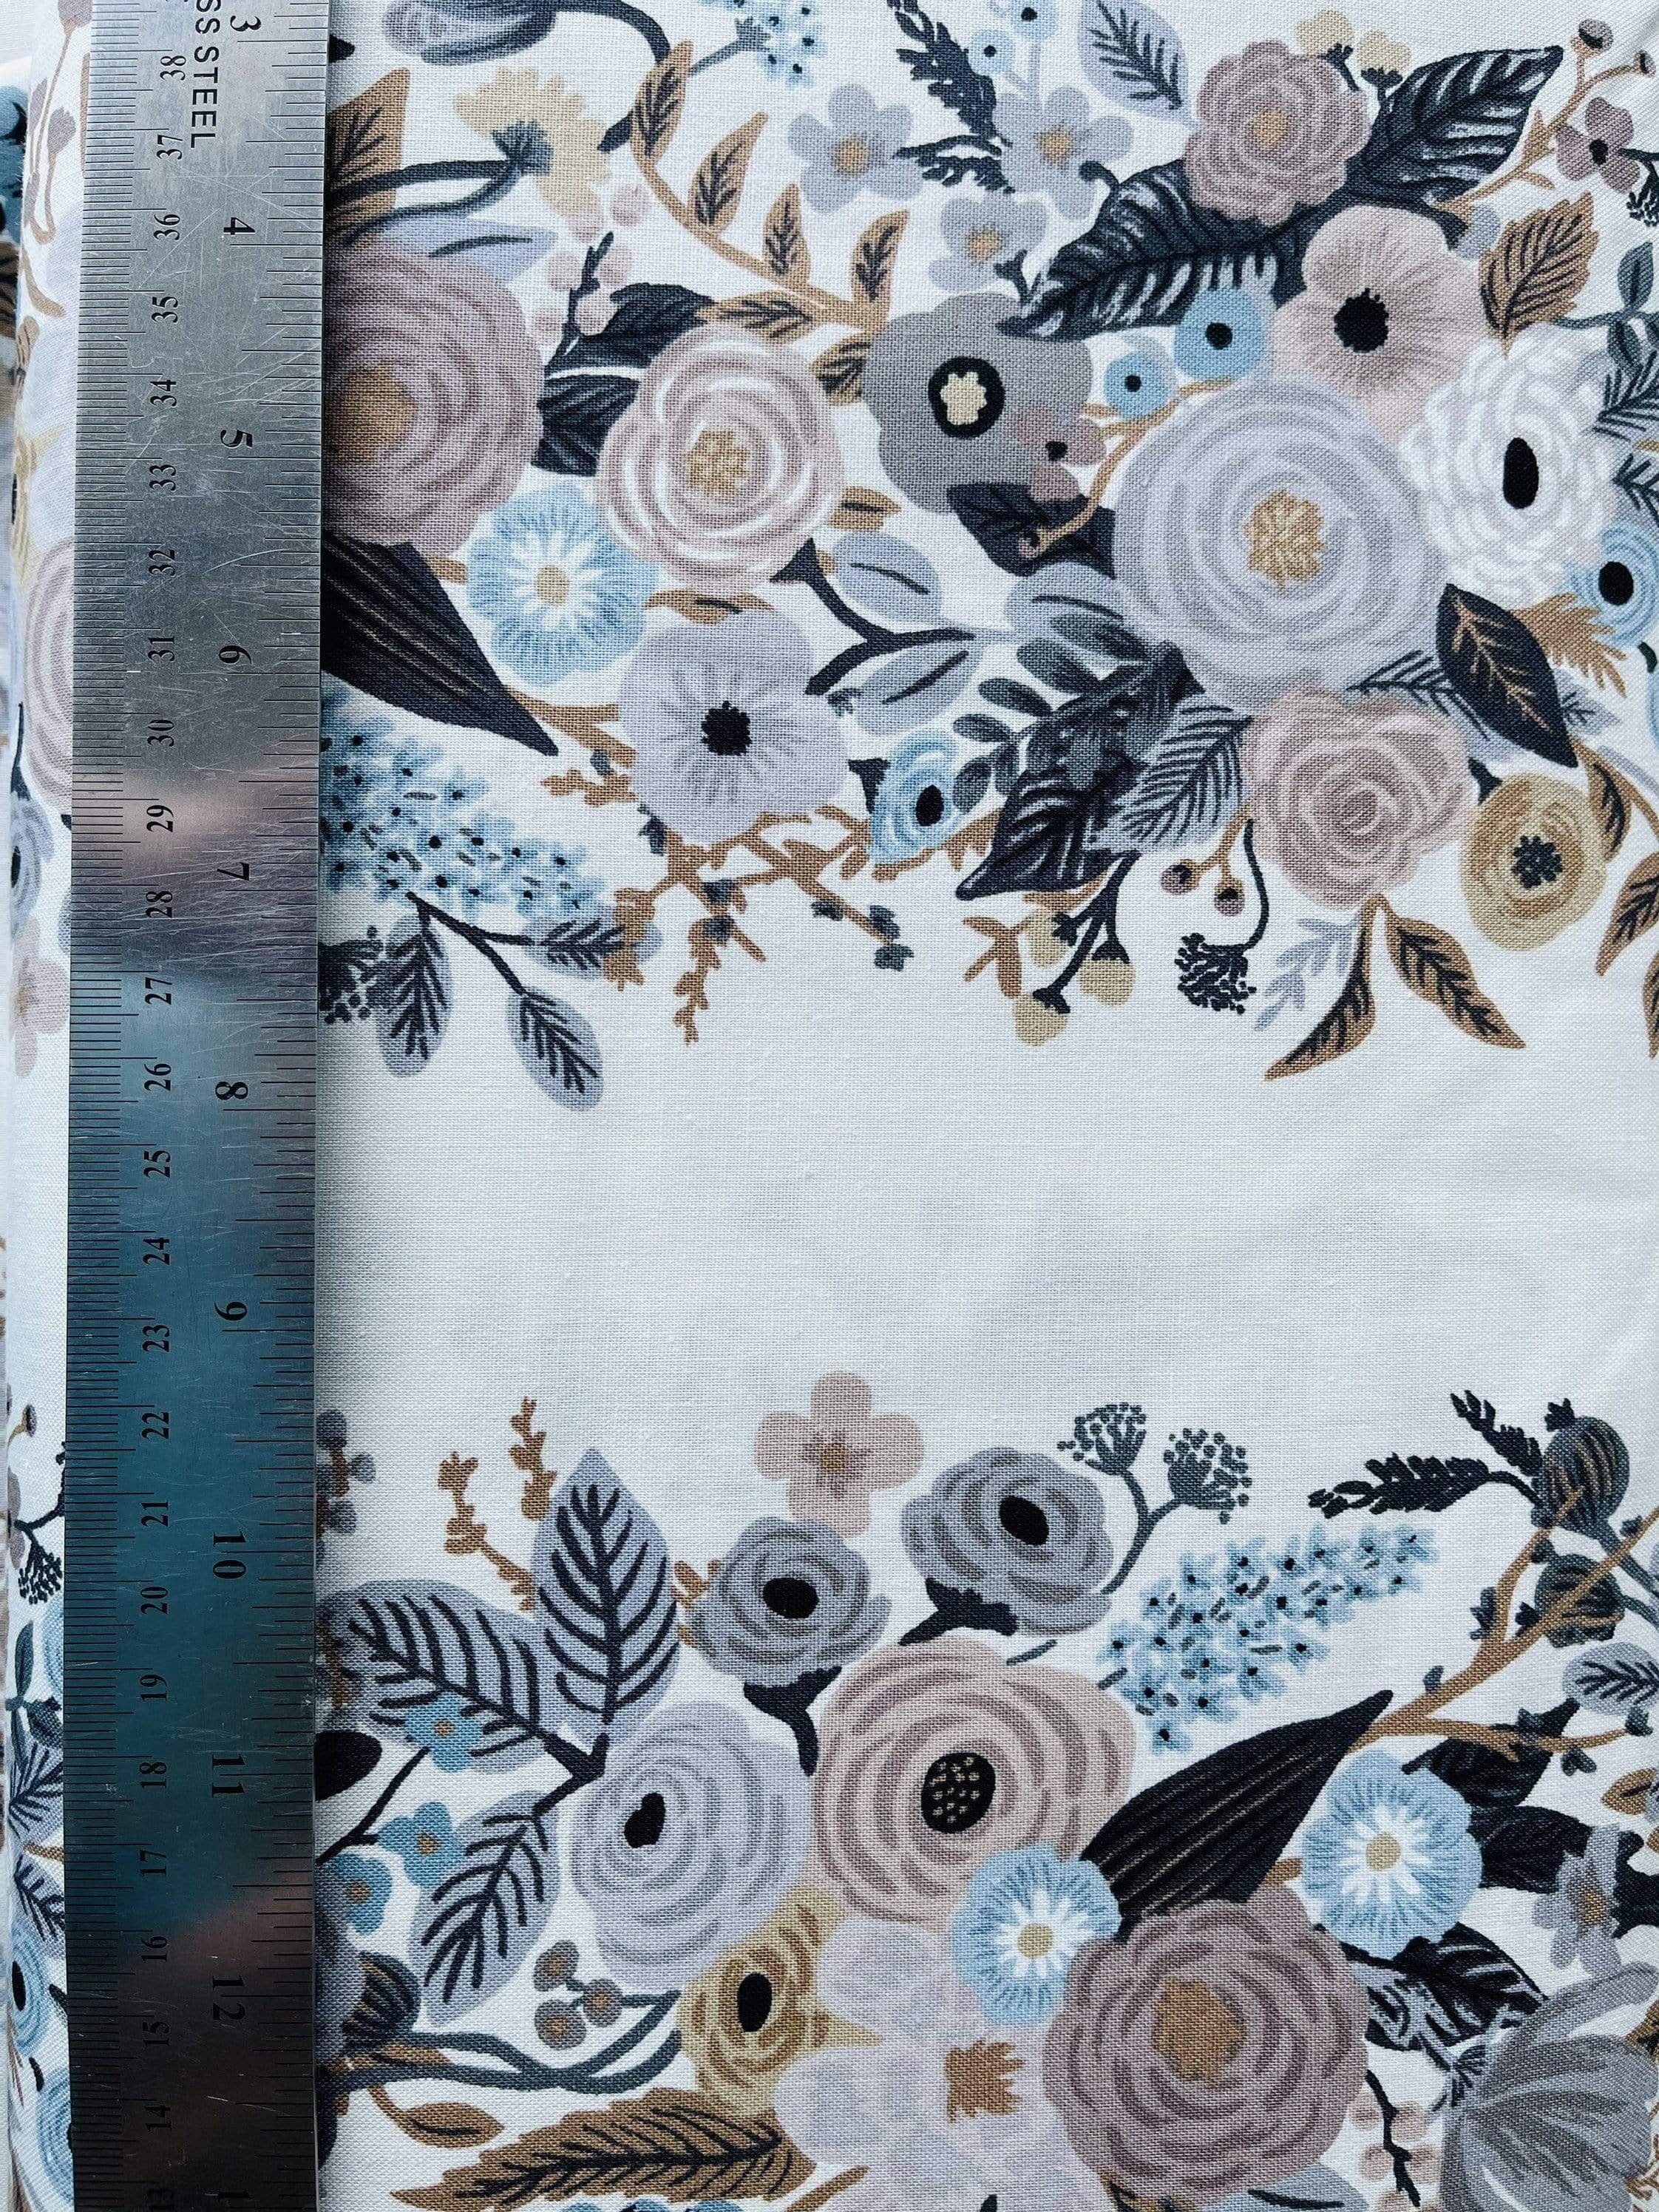 Wildflower Field-black CANVAS Fabric, Rifle Paper Co. Cotton Linen Blend,  Meadow Collection, Upholstery Fabric, Cottonsteel Fabrics 